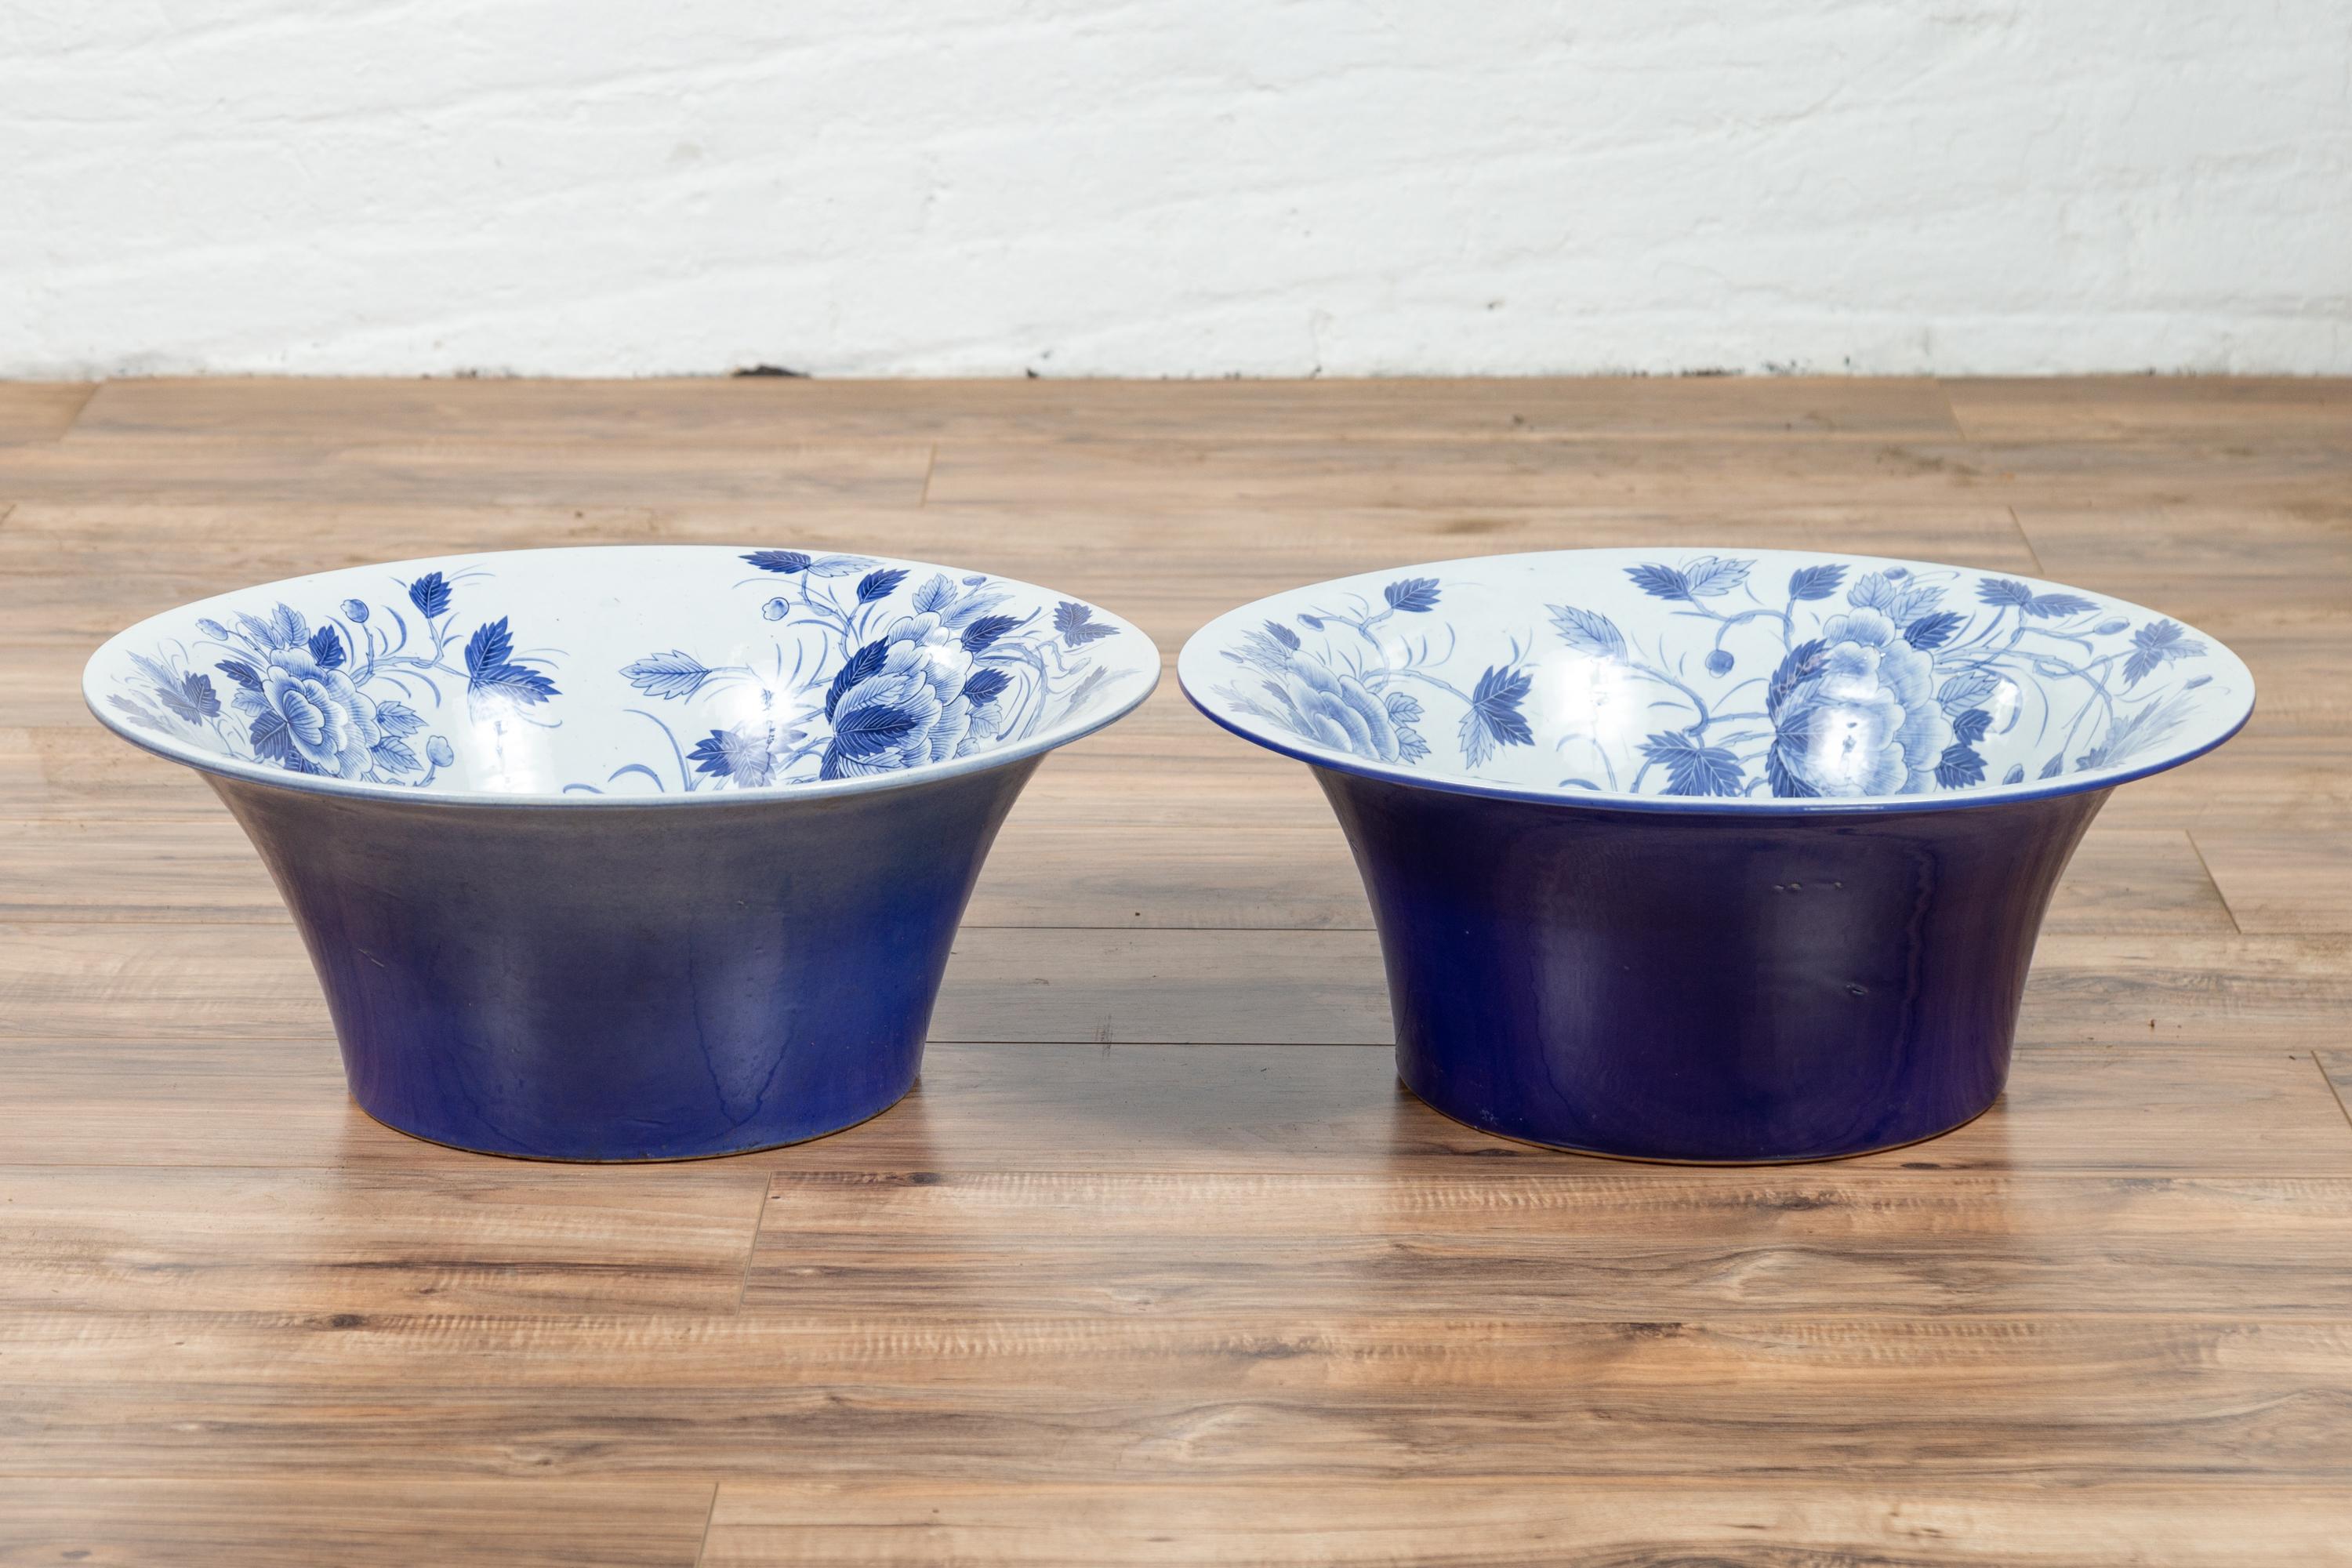 Vintage Thai blue and white porcelain wash basins with cobalt blue patina and floral motifs, priced and sold individually (four available). Each adopting a wide open shape flaring in the upper section, these wash basins are adorned with blue